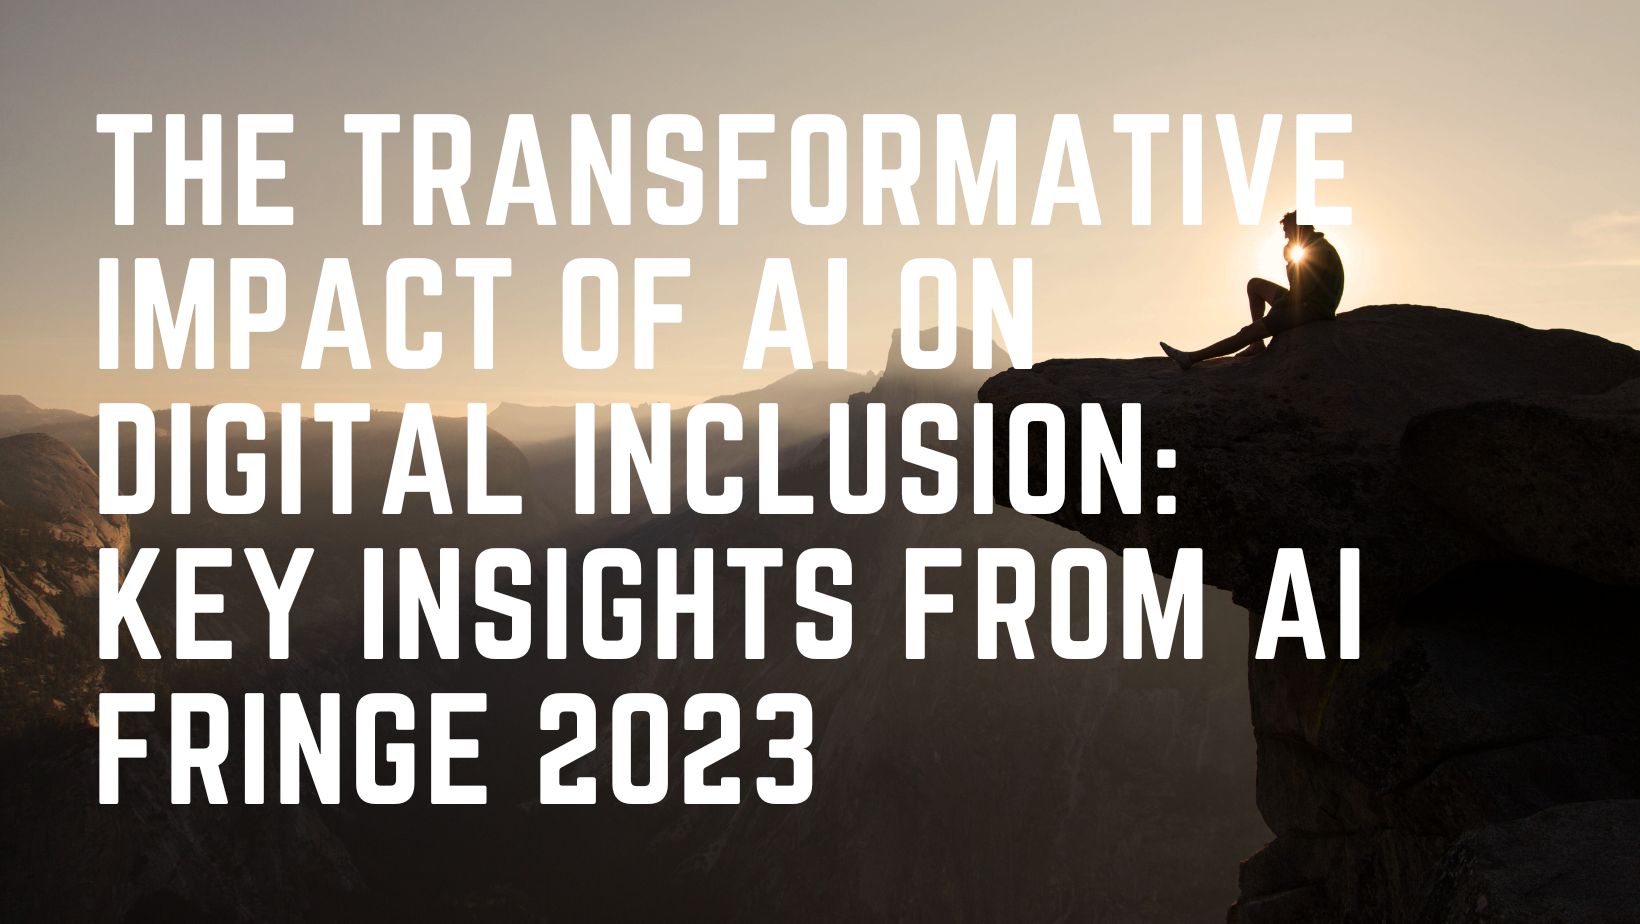 The Transformative Impact of AI on Digital Inclusion: Key Insights from AI Fringe 2023